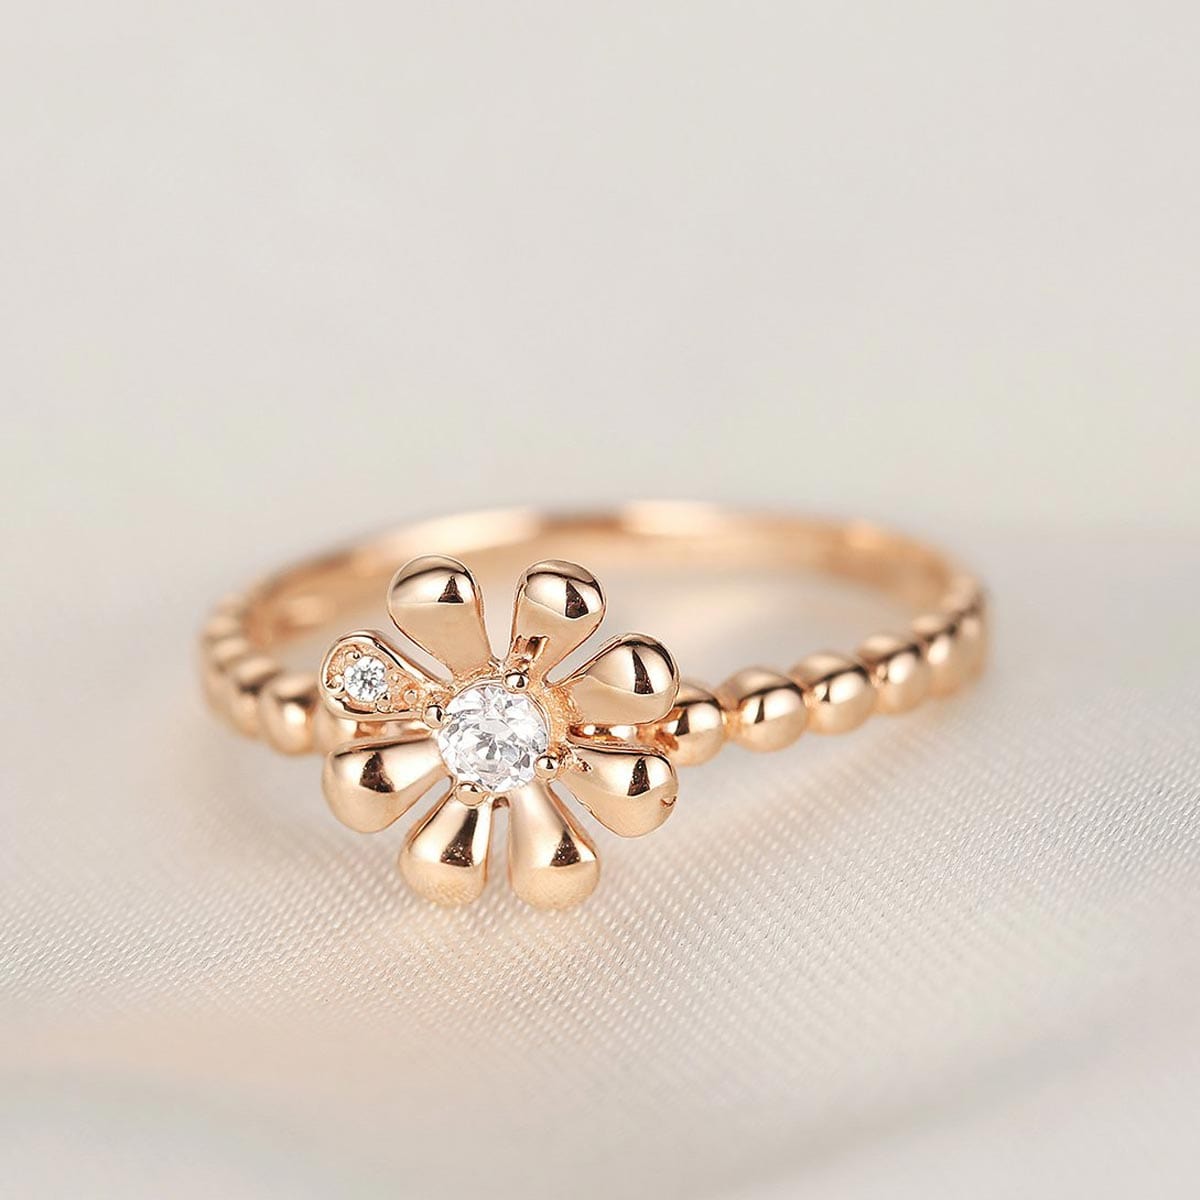 Blooming flower with white diamond 14k rose gold bead ring band